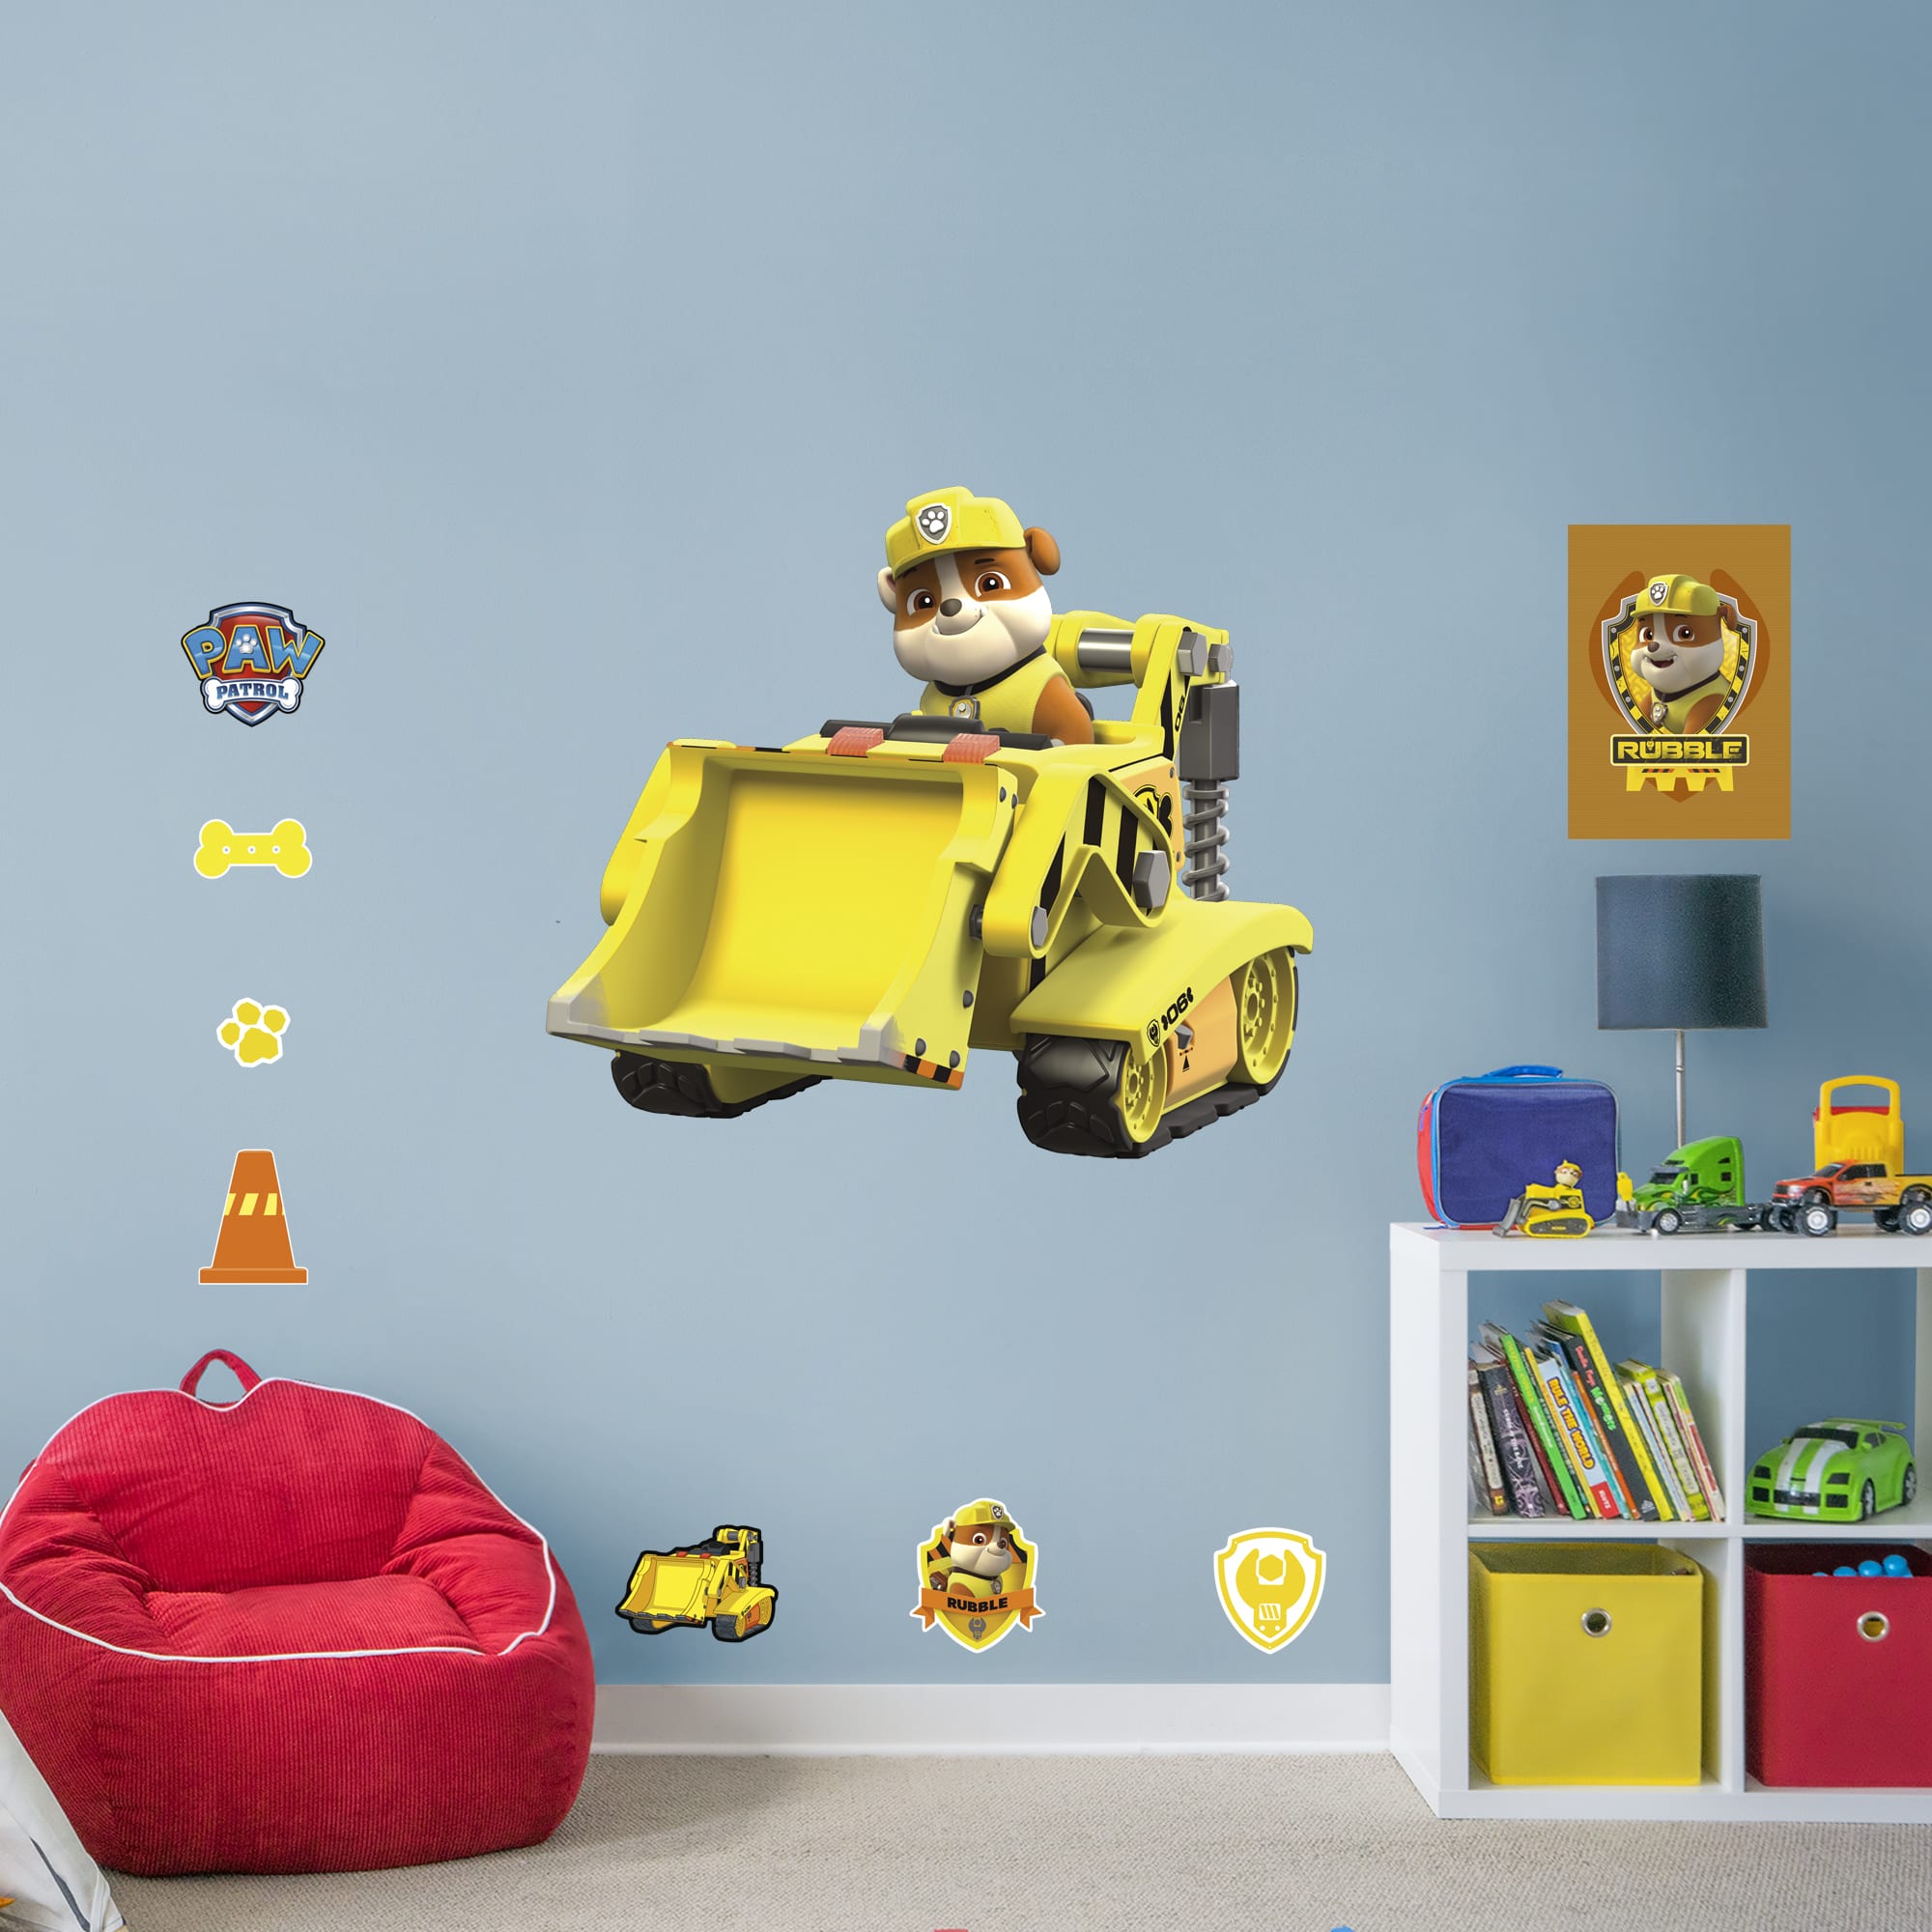 Rubble: Digger - Officially Licensed PAW Patrol Removable Wall Decal Giant Character + 10 Licensed Decals (44"W x 38"H) by Fathe